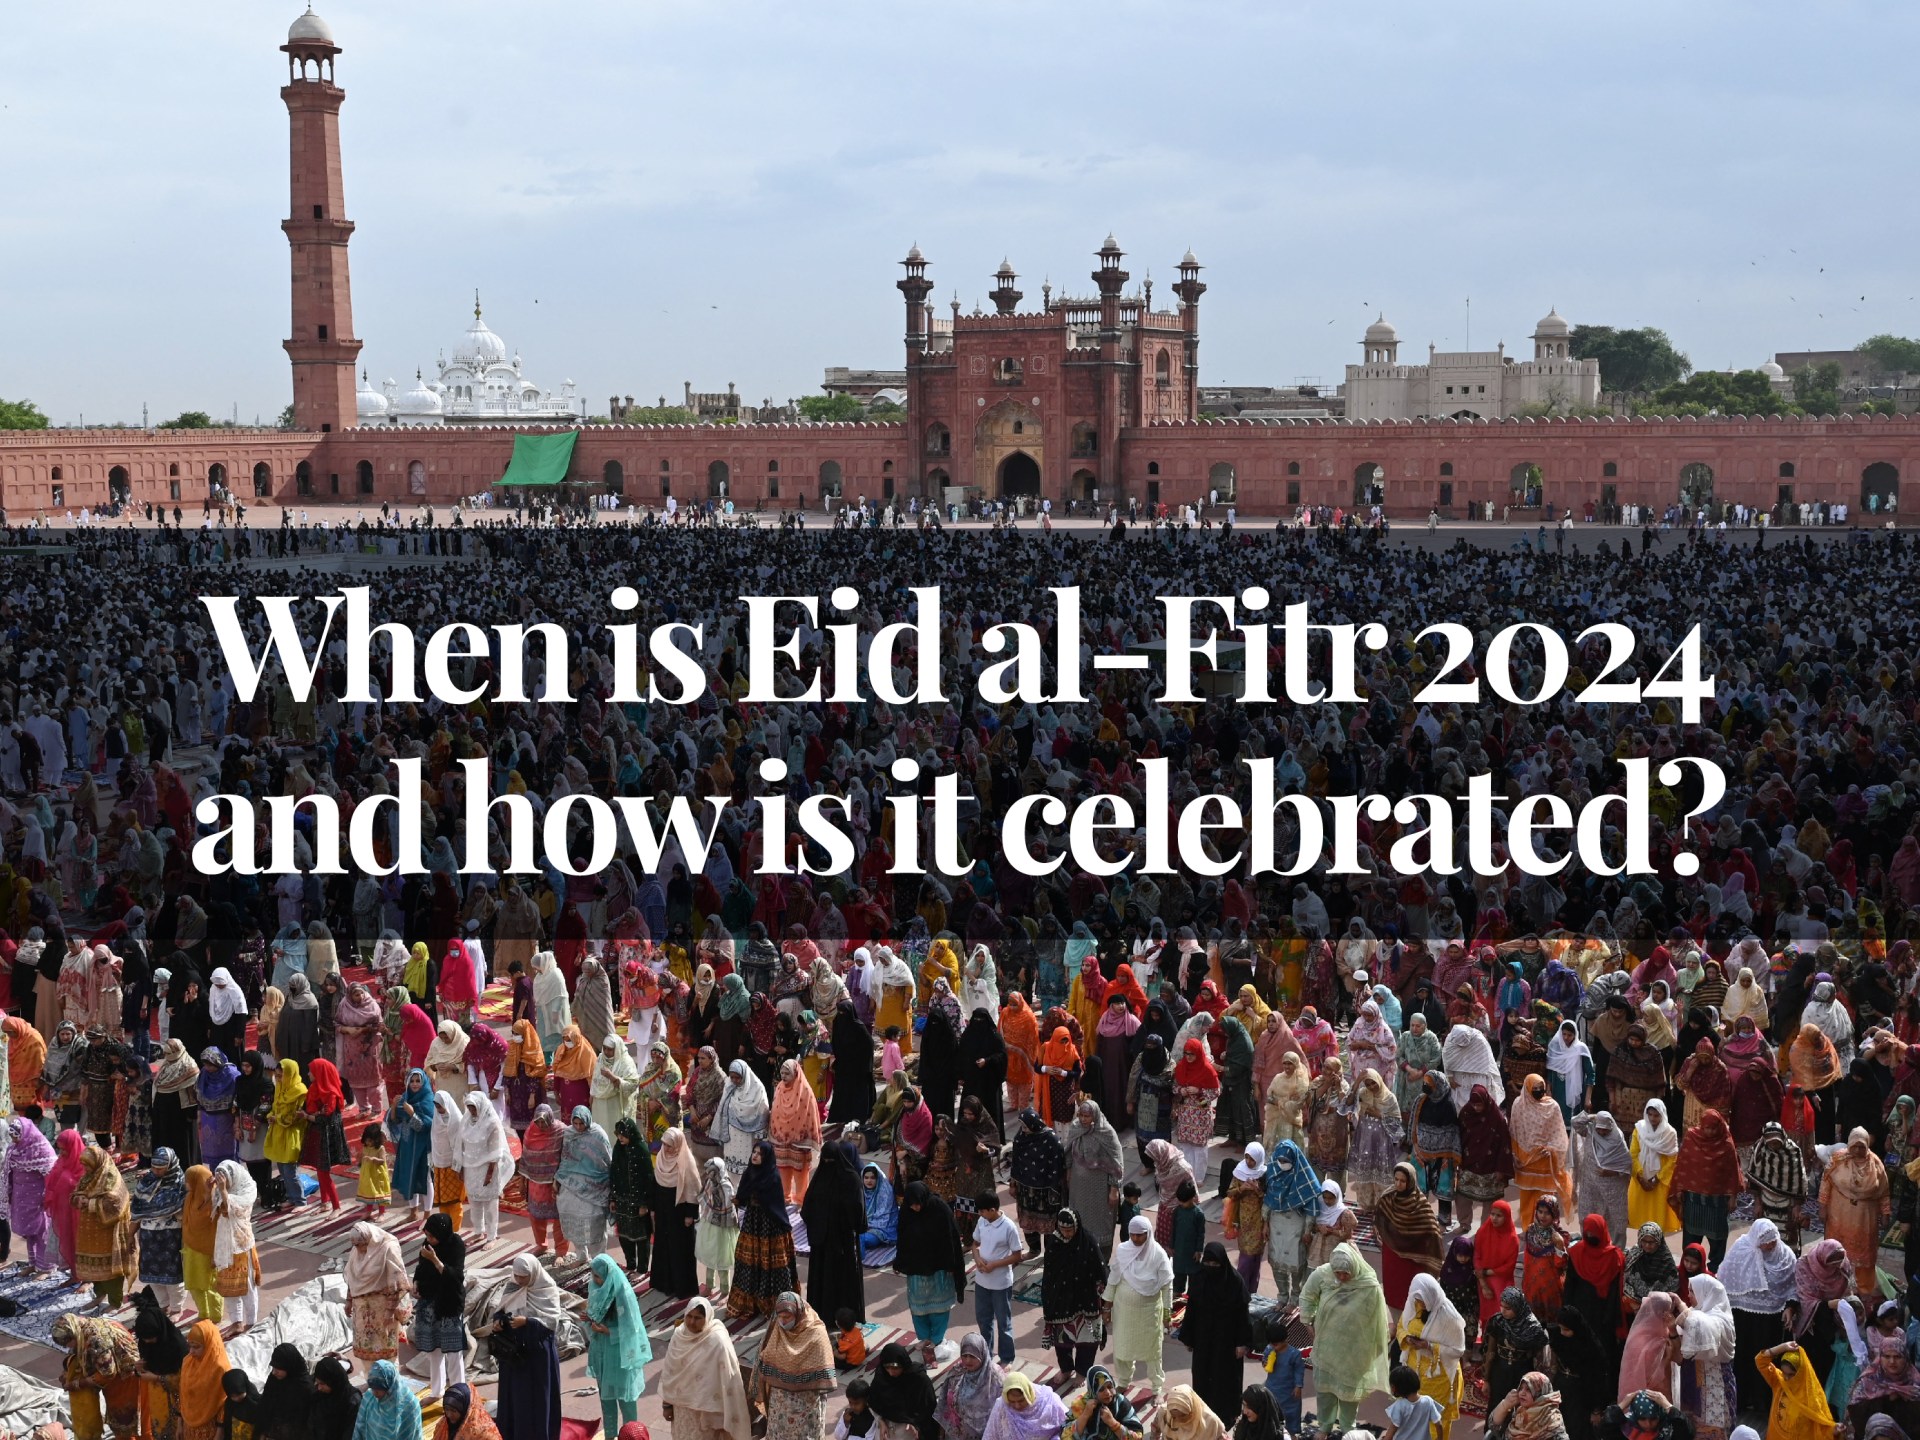 When is Eid al-Fitr 2024 and how is it celebrated? | Religion News